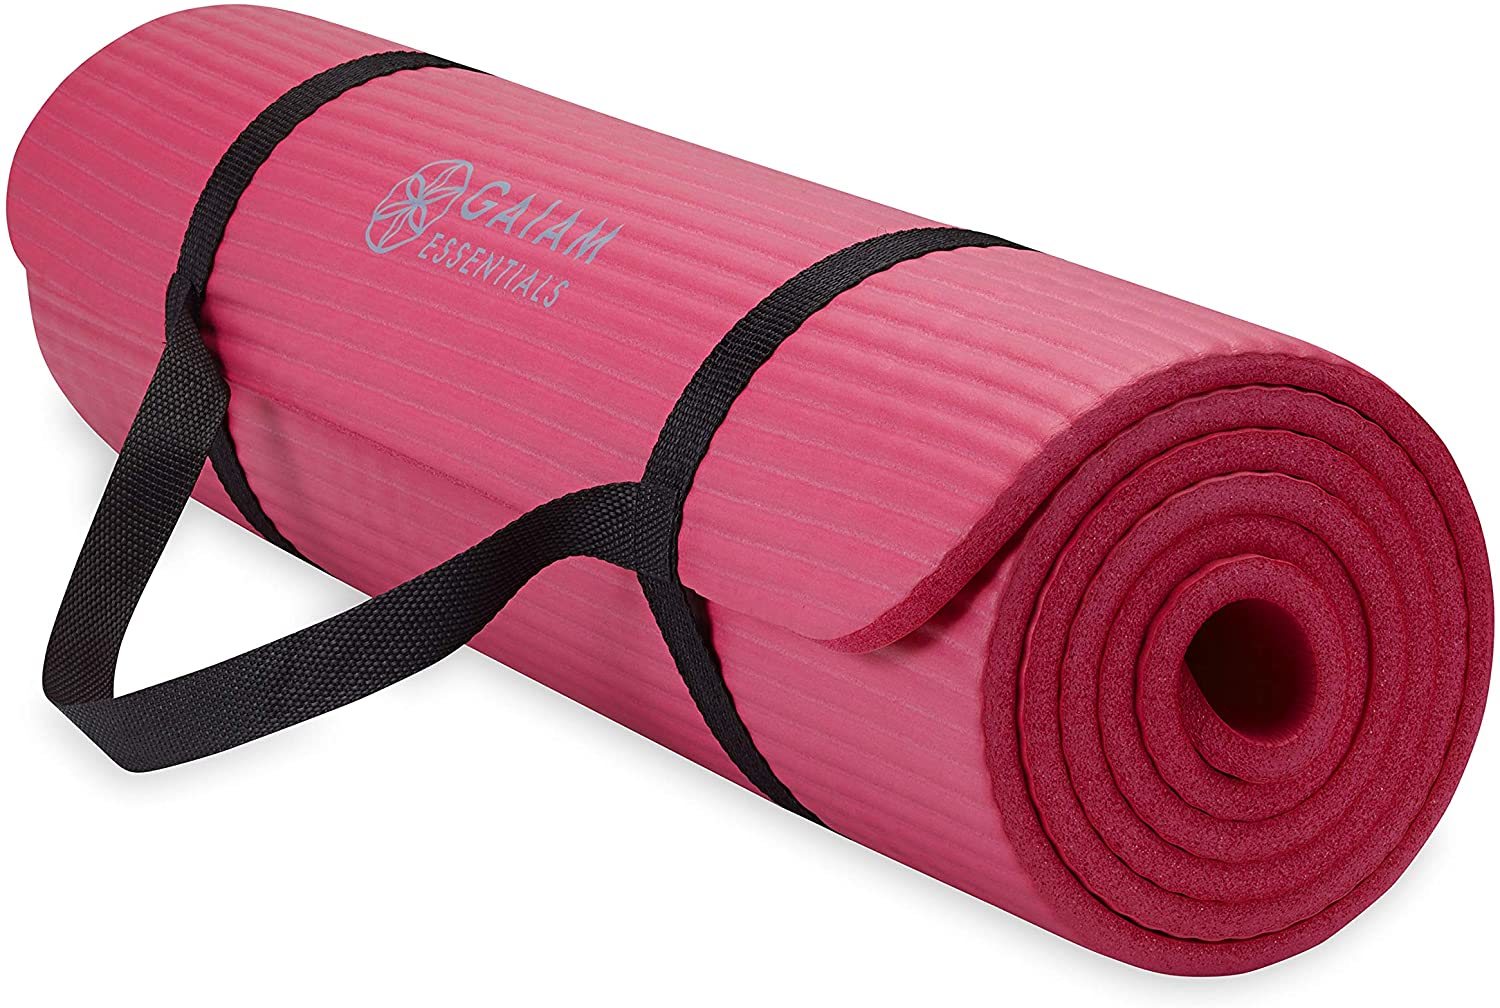 Extra Thick Yoga Mat 20mm